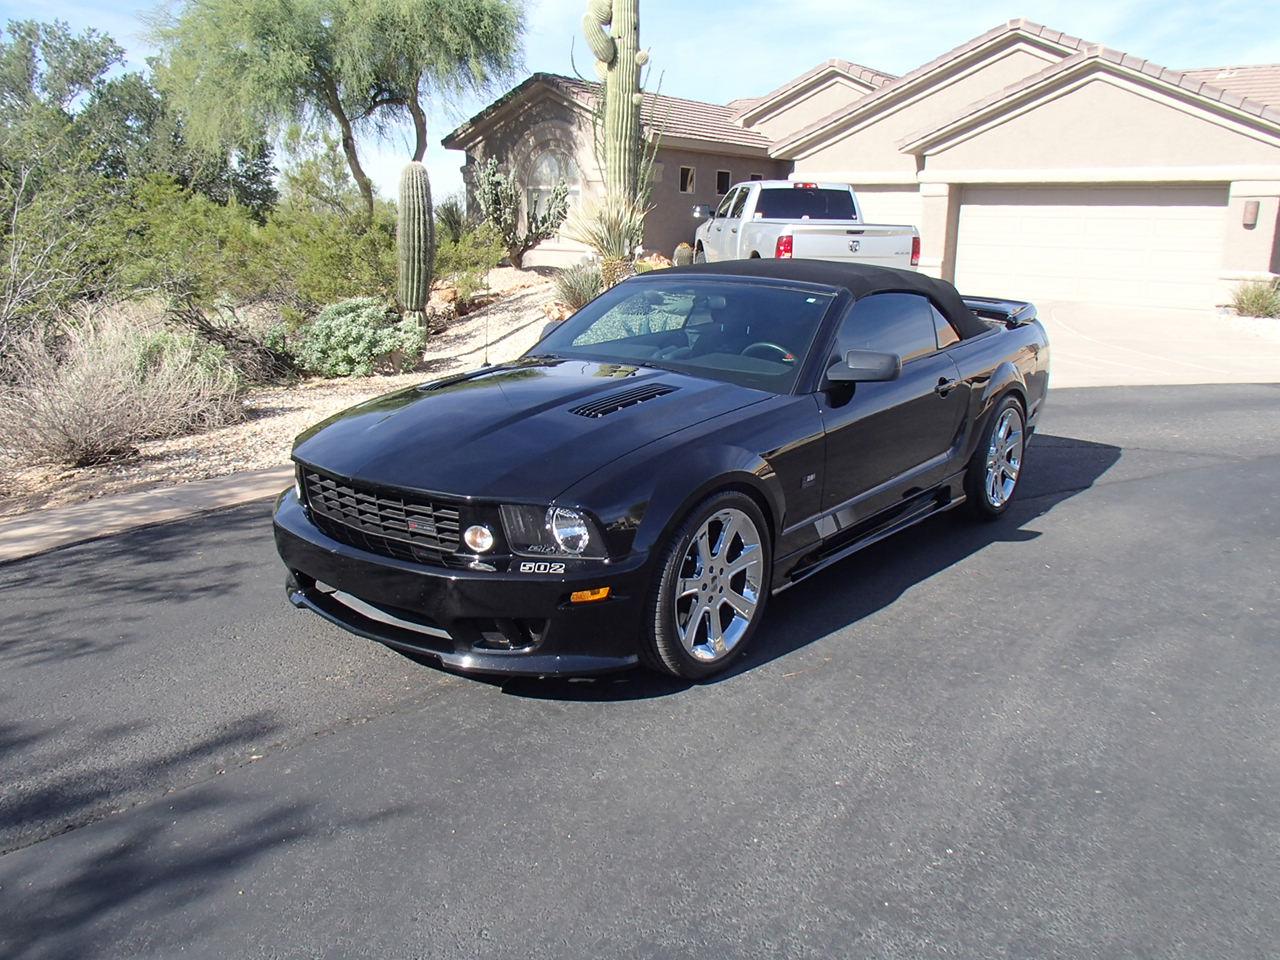 2007 Ford Mustang (Saleen) for sale in Cave Creek, AZ – photo 4